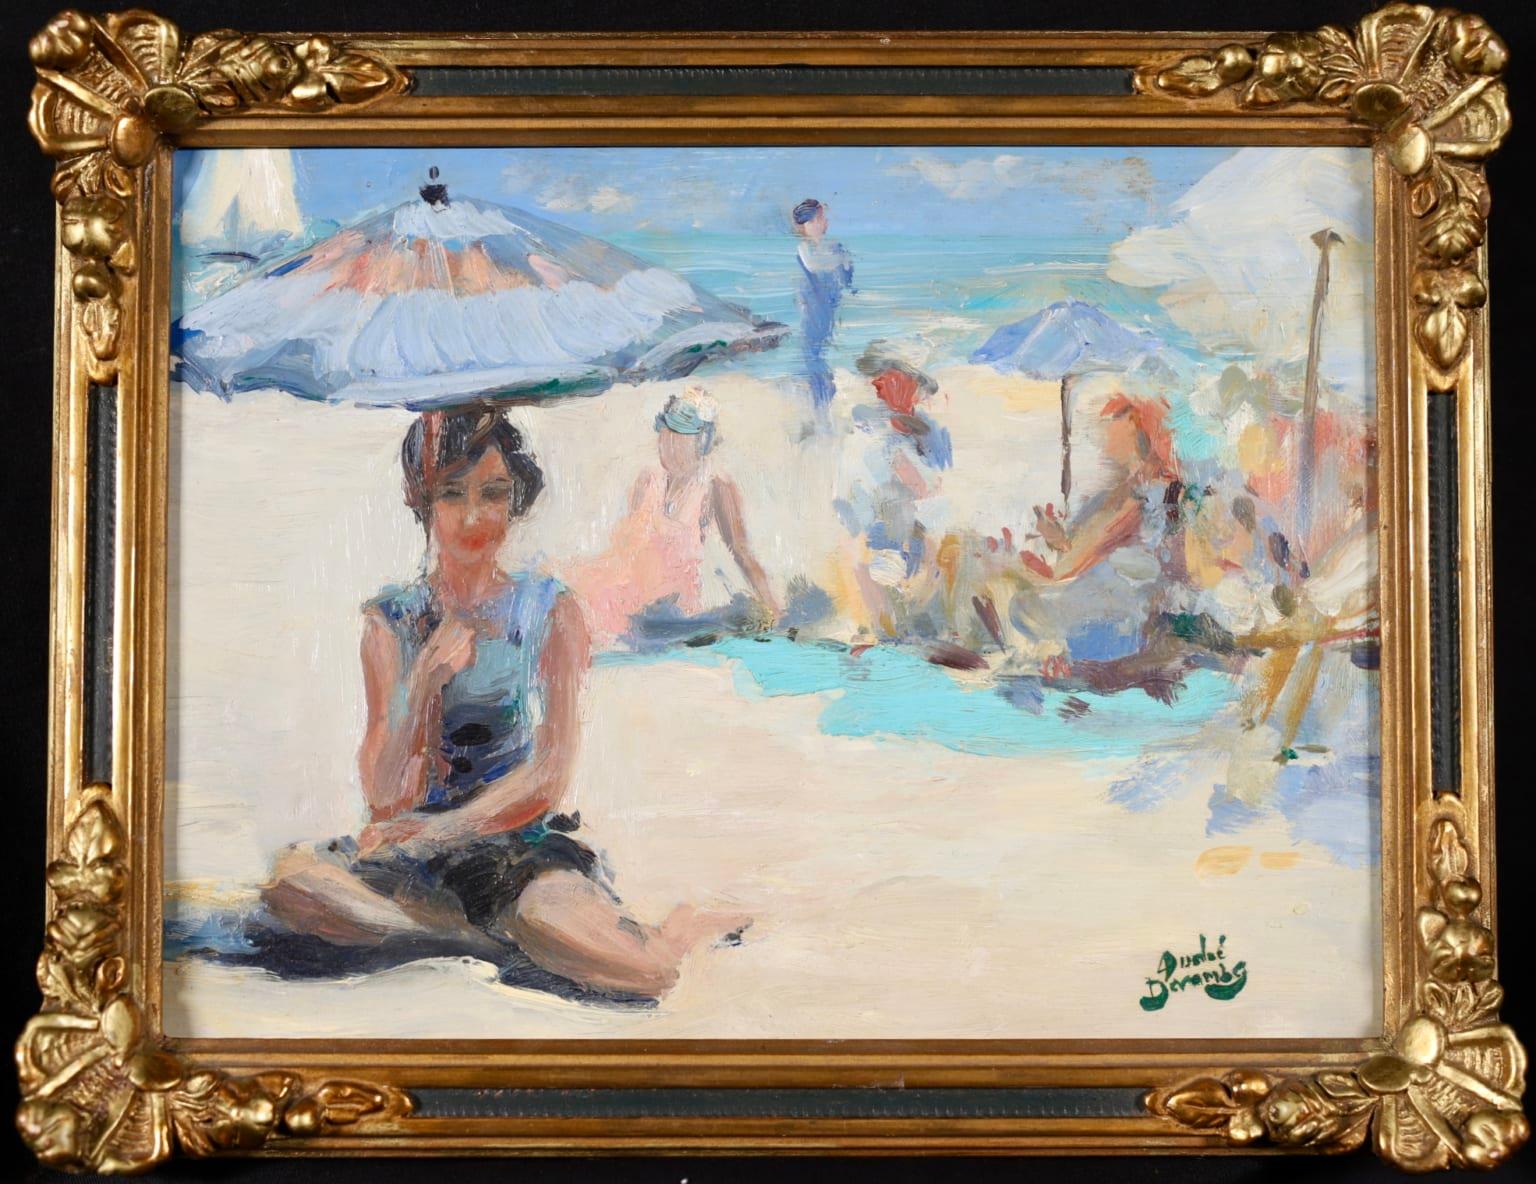 Baigneuse - Impressionist Oil, Figures in Beach Landscape by Andre Devambez - Painting by André Devambez